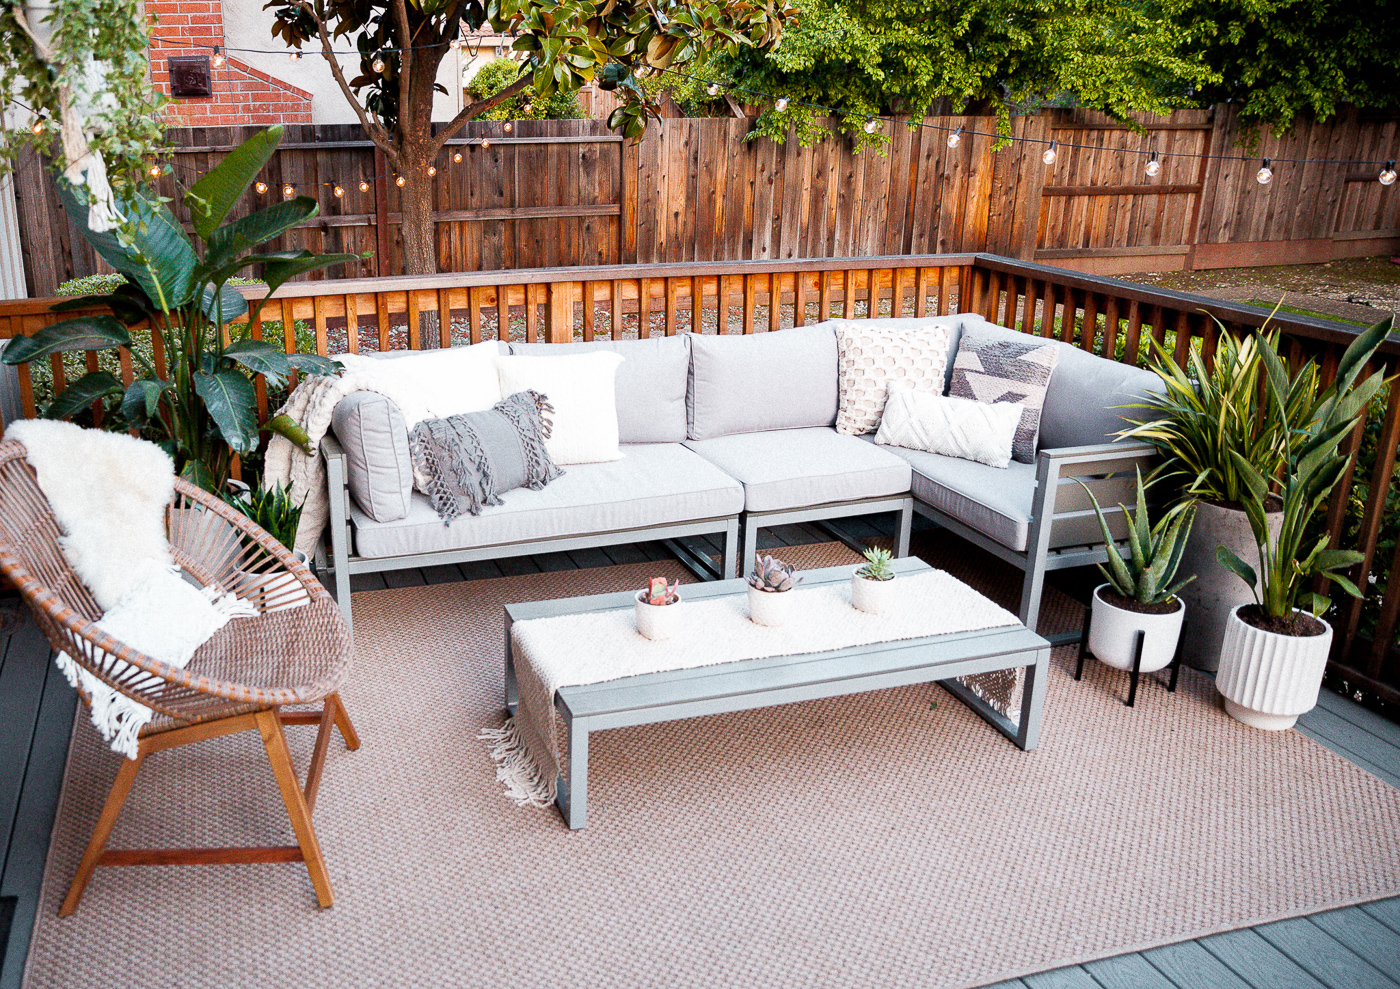 Best products for backyard patio furniture and decor. www.thegirlintheyellowdress.com